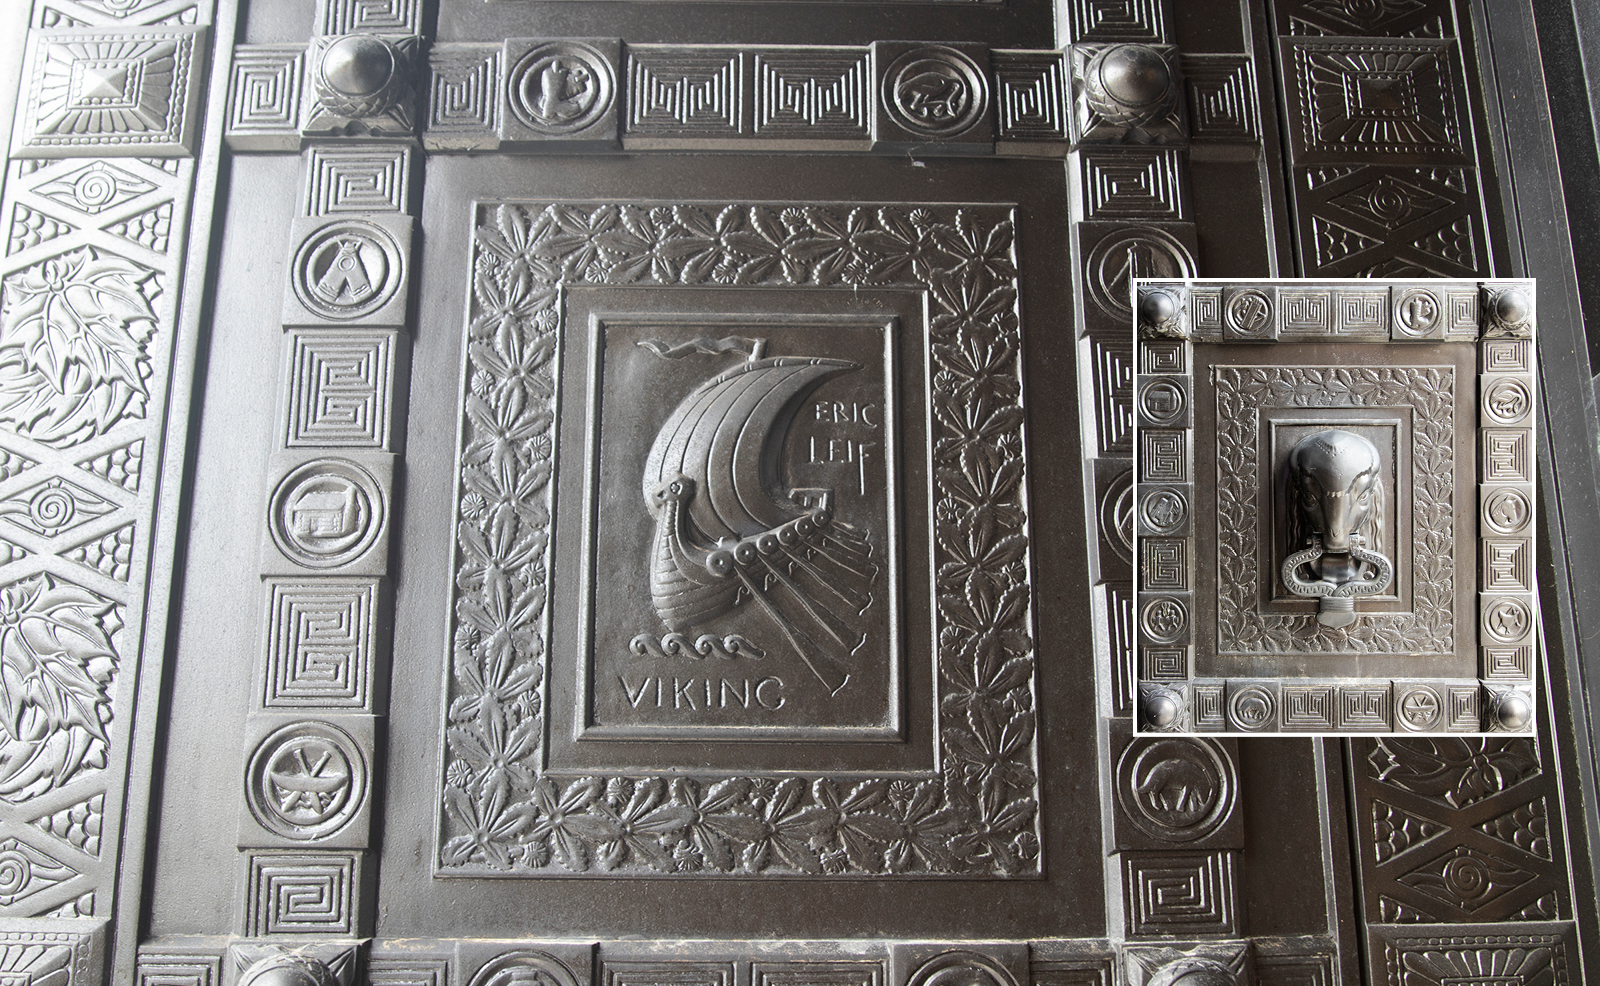 Image of an ornate, bronze door featuring a carving of a Viking ship and the name 'Eric Leif', and an image of a buffalo head door handle